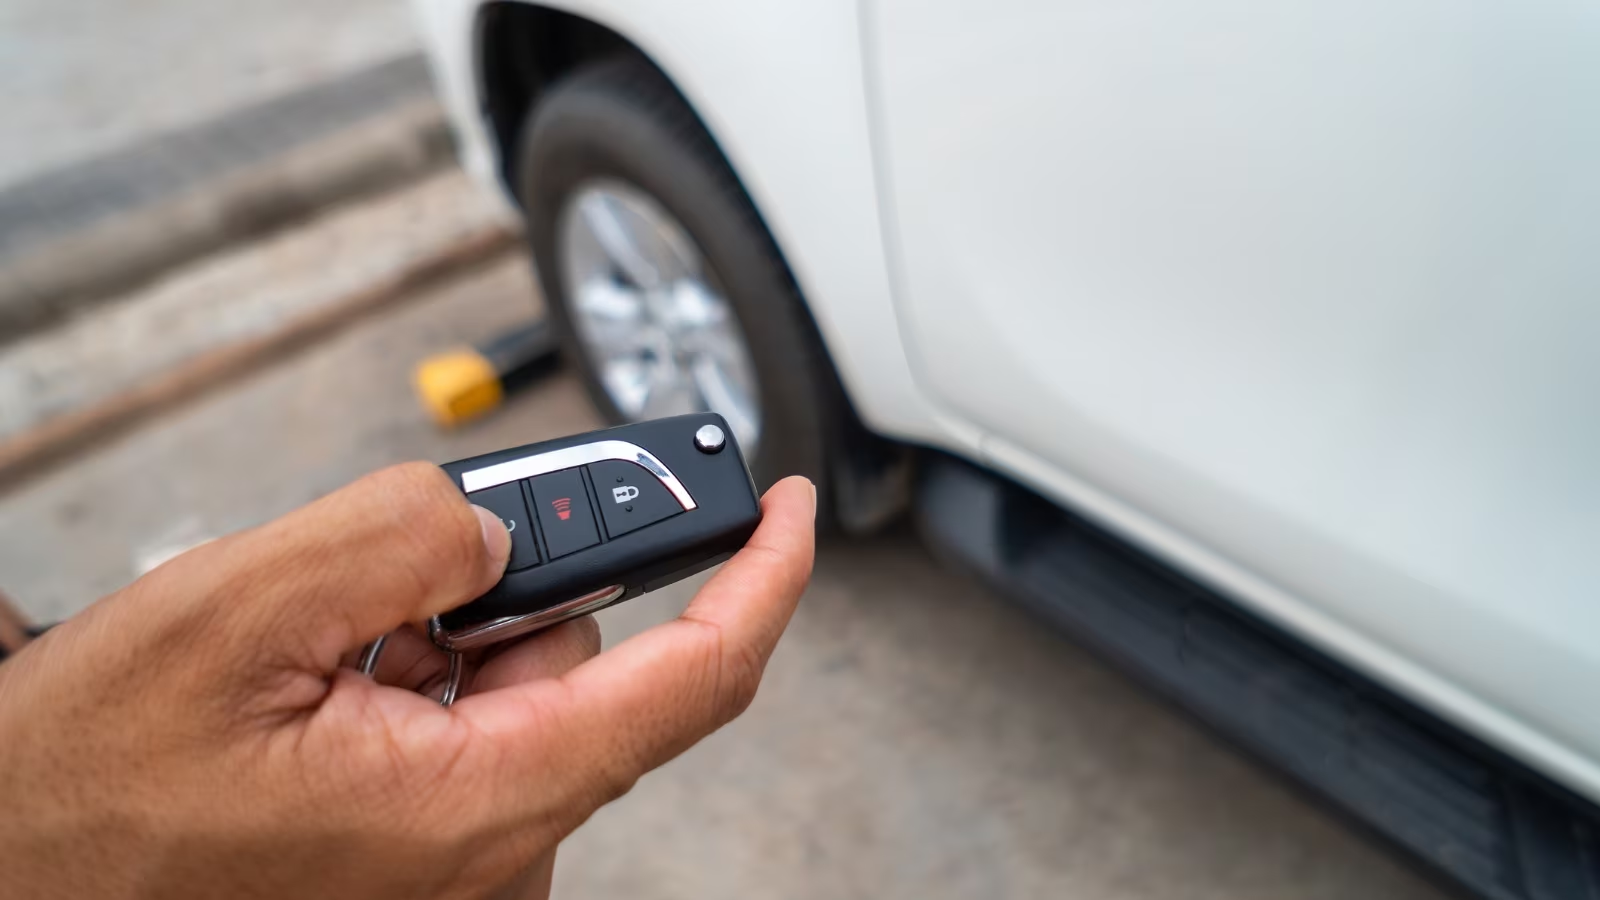 What are the components of a car key fob?